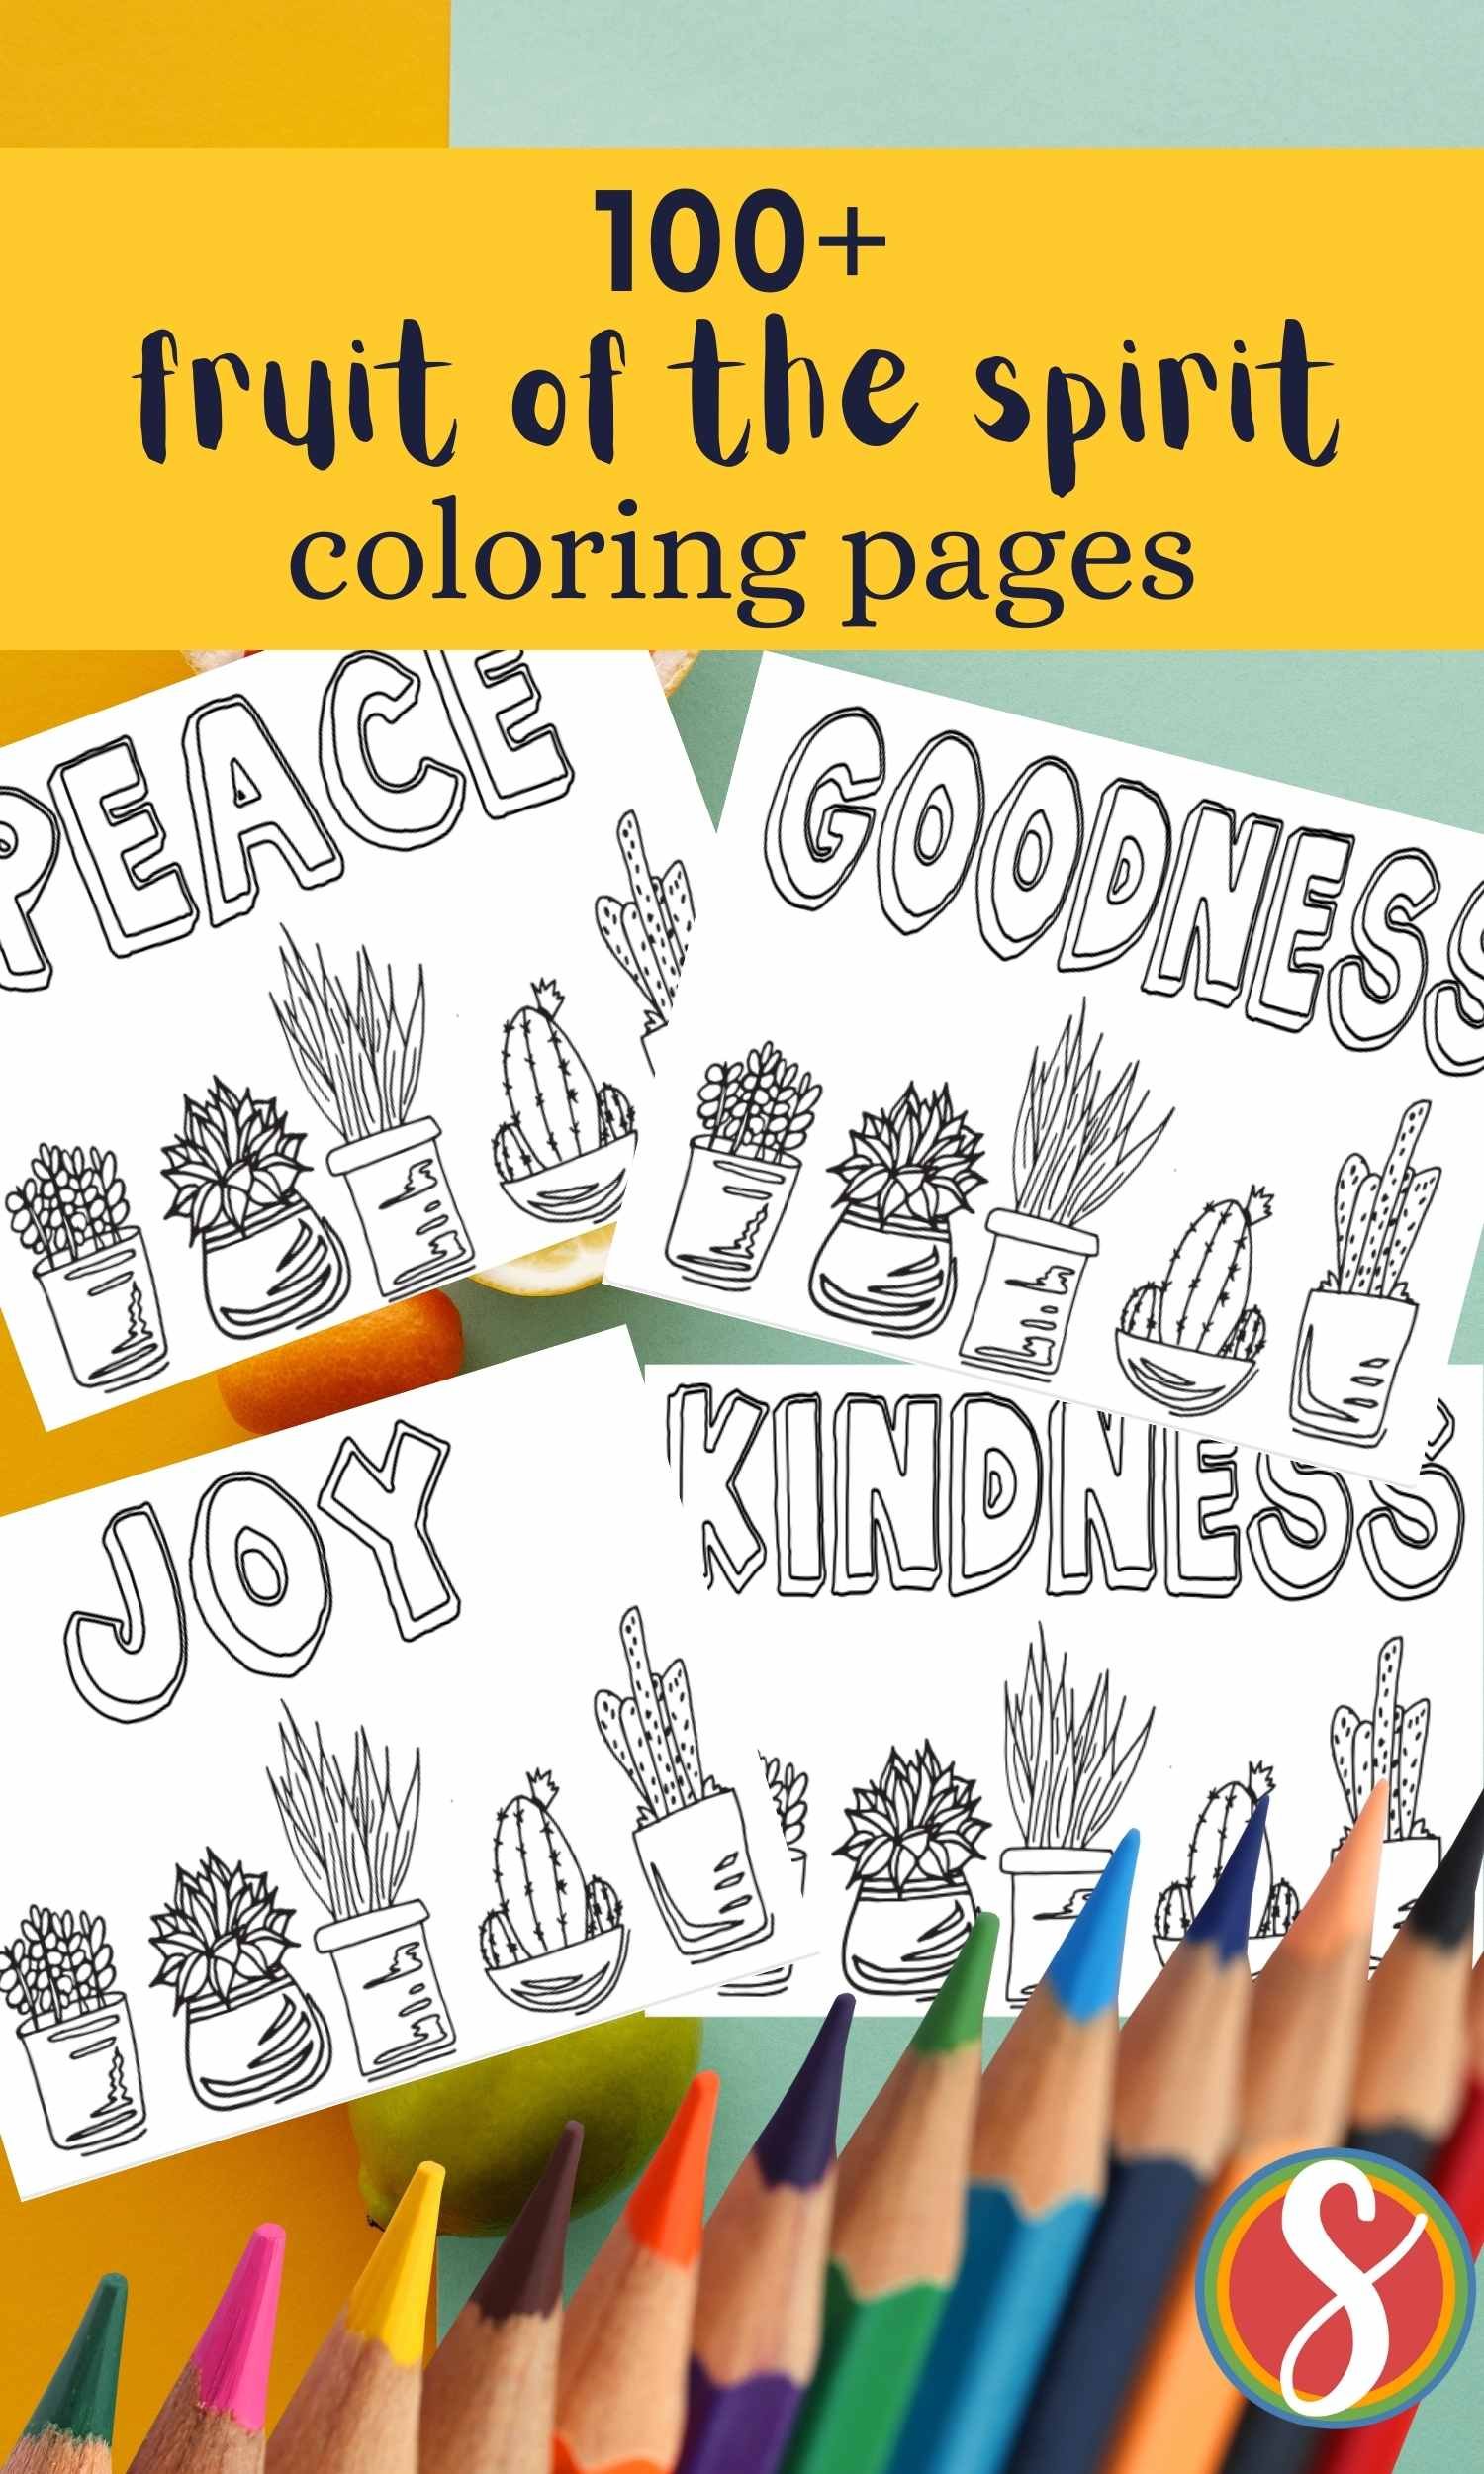 a collage of fruit of the spirit coloring pages, the colorable fruit written above and a line of colorable succulents below